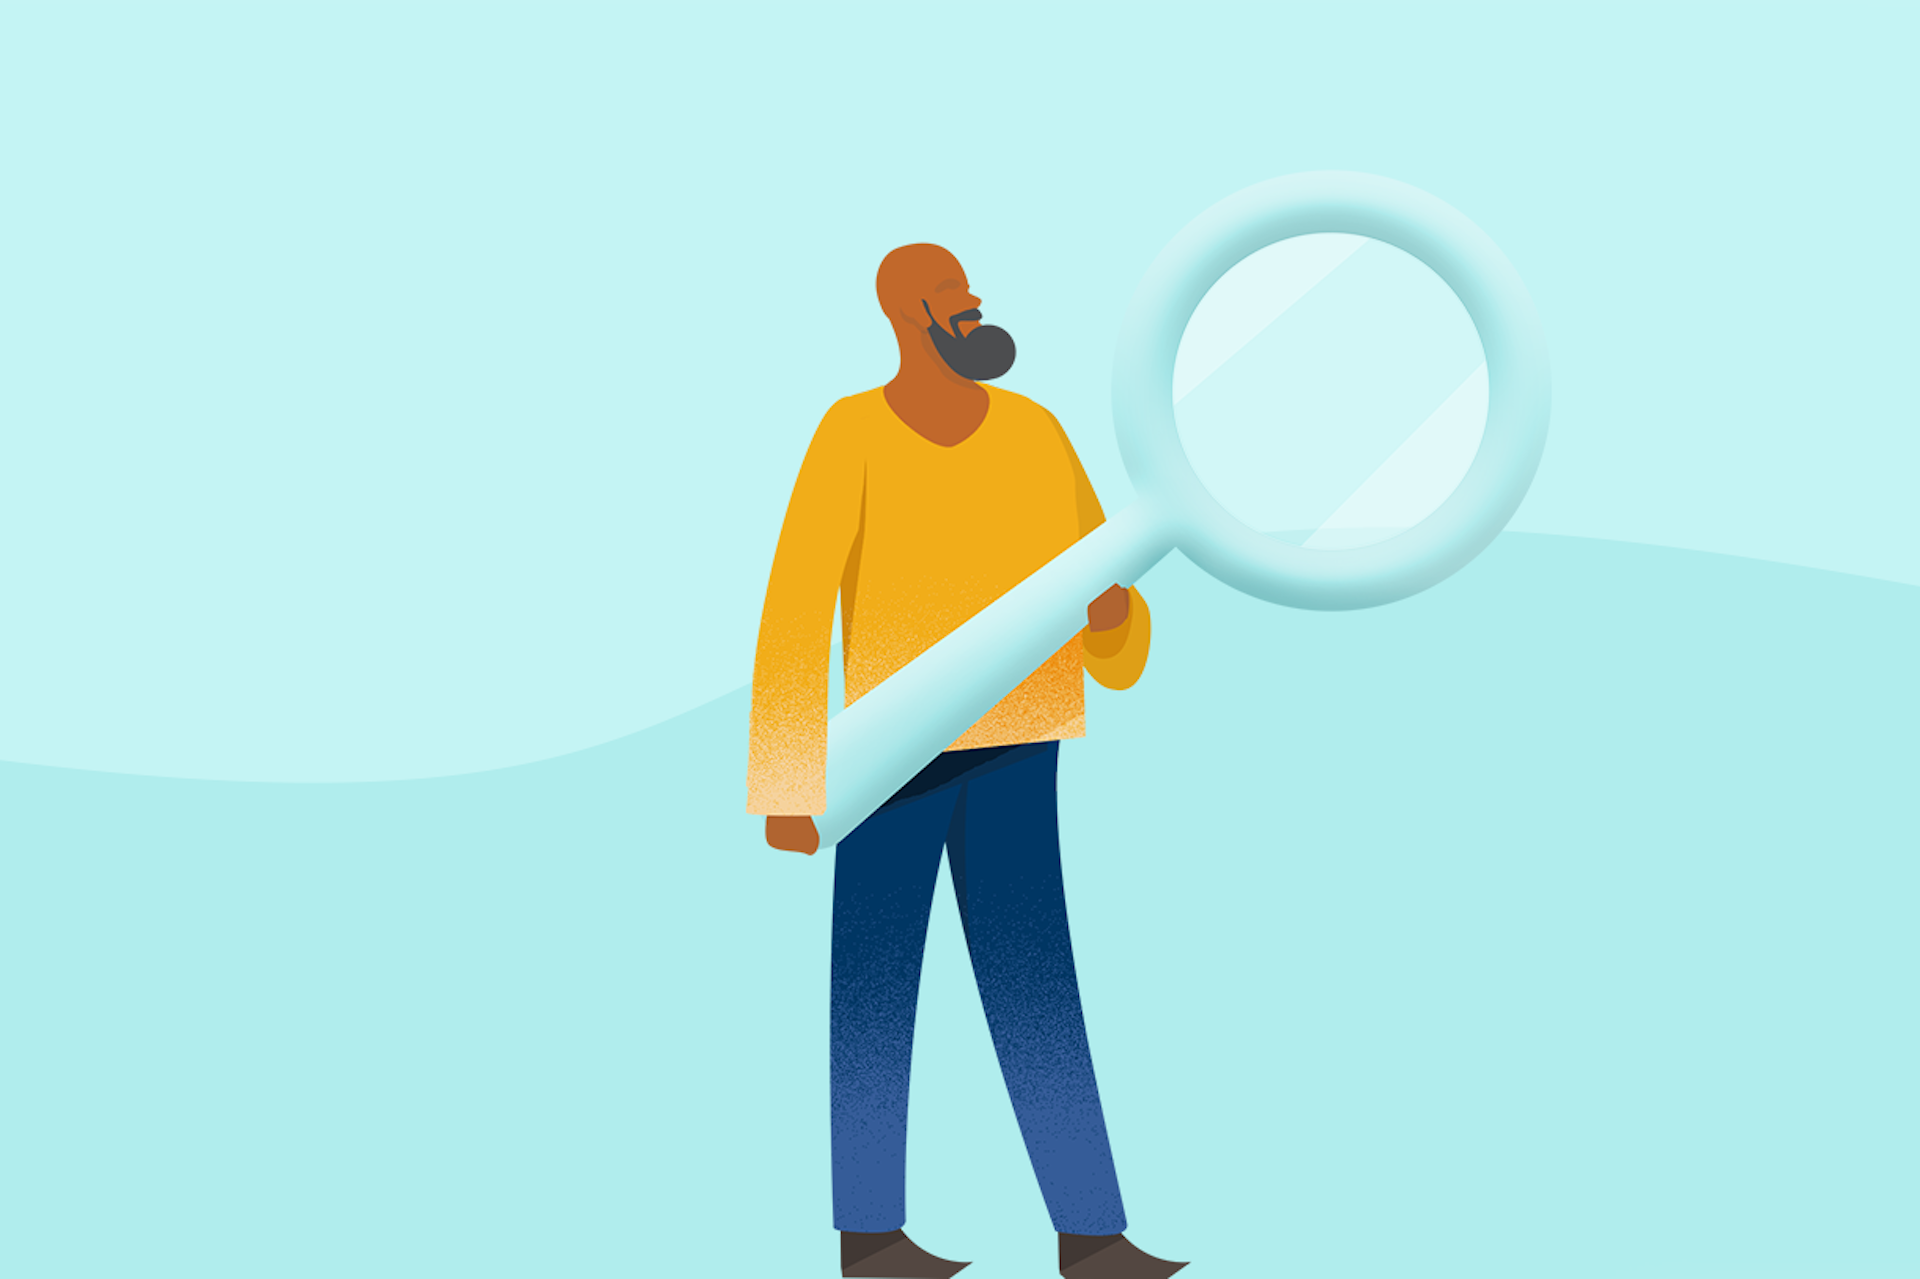 Looking for an alternative social media management solution? This image of a man holding a giant magnifying glass represents how monumental that search can feel. In this blog, we explore alternative social media solutions to Tailwind.